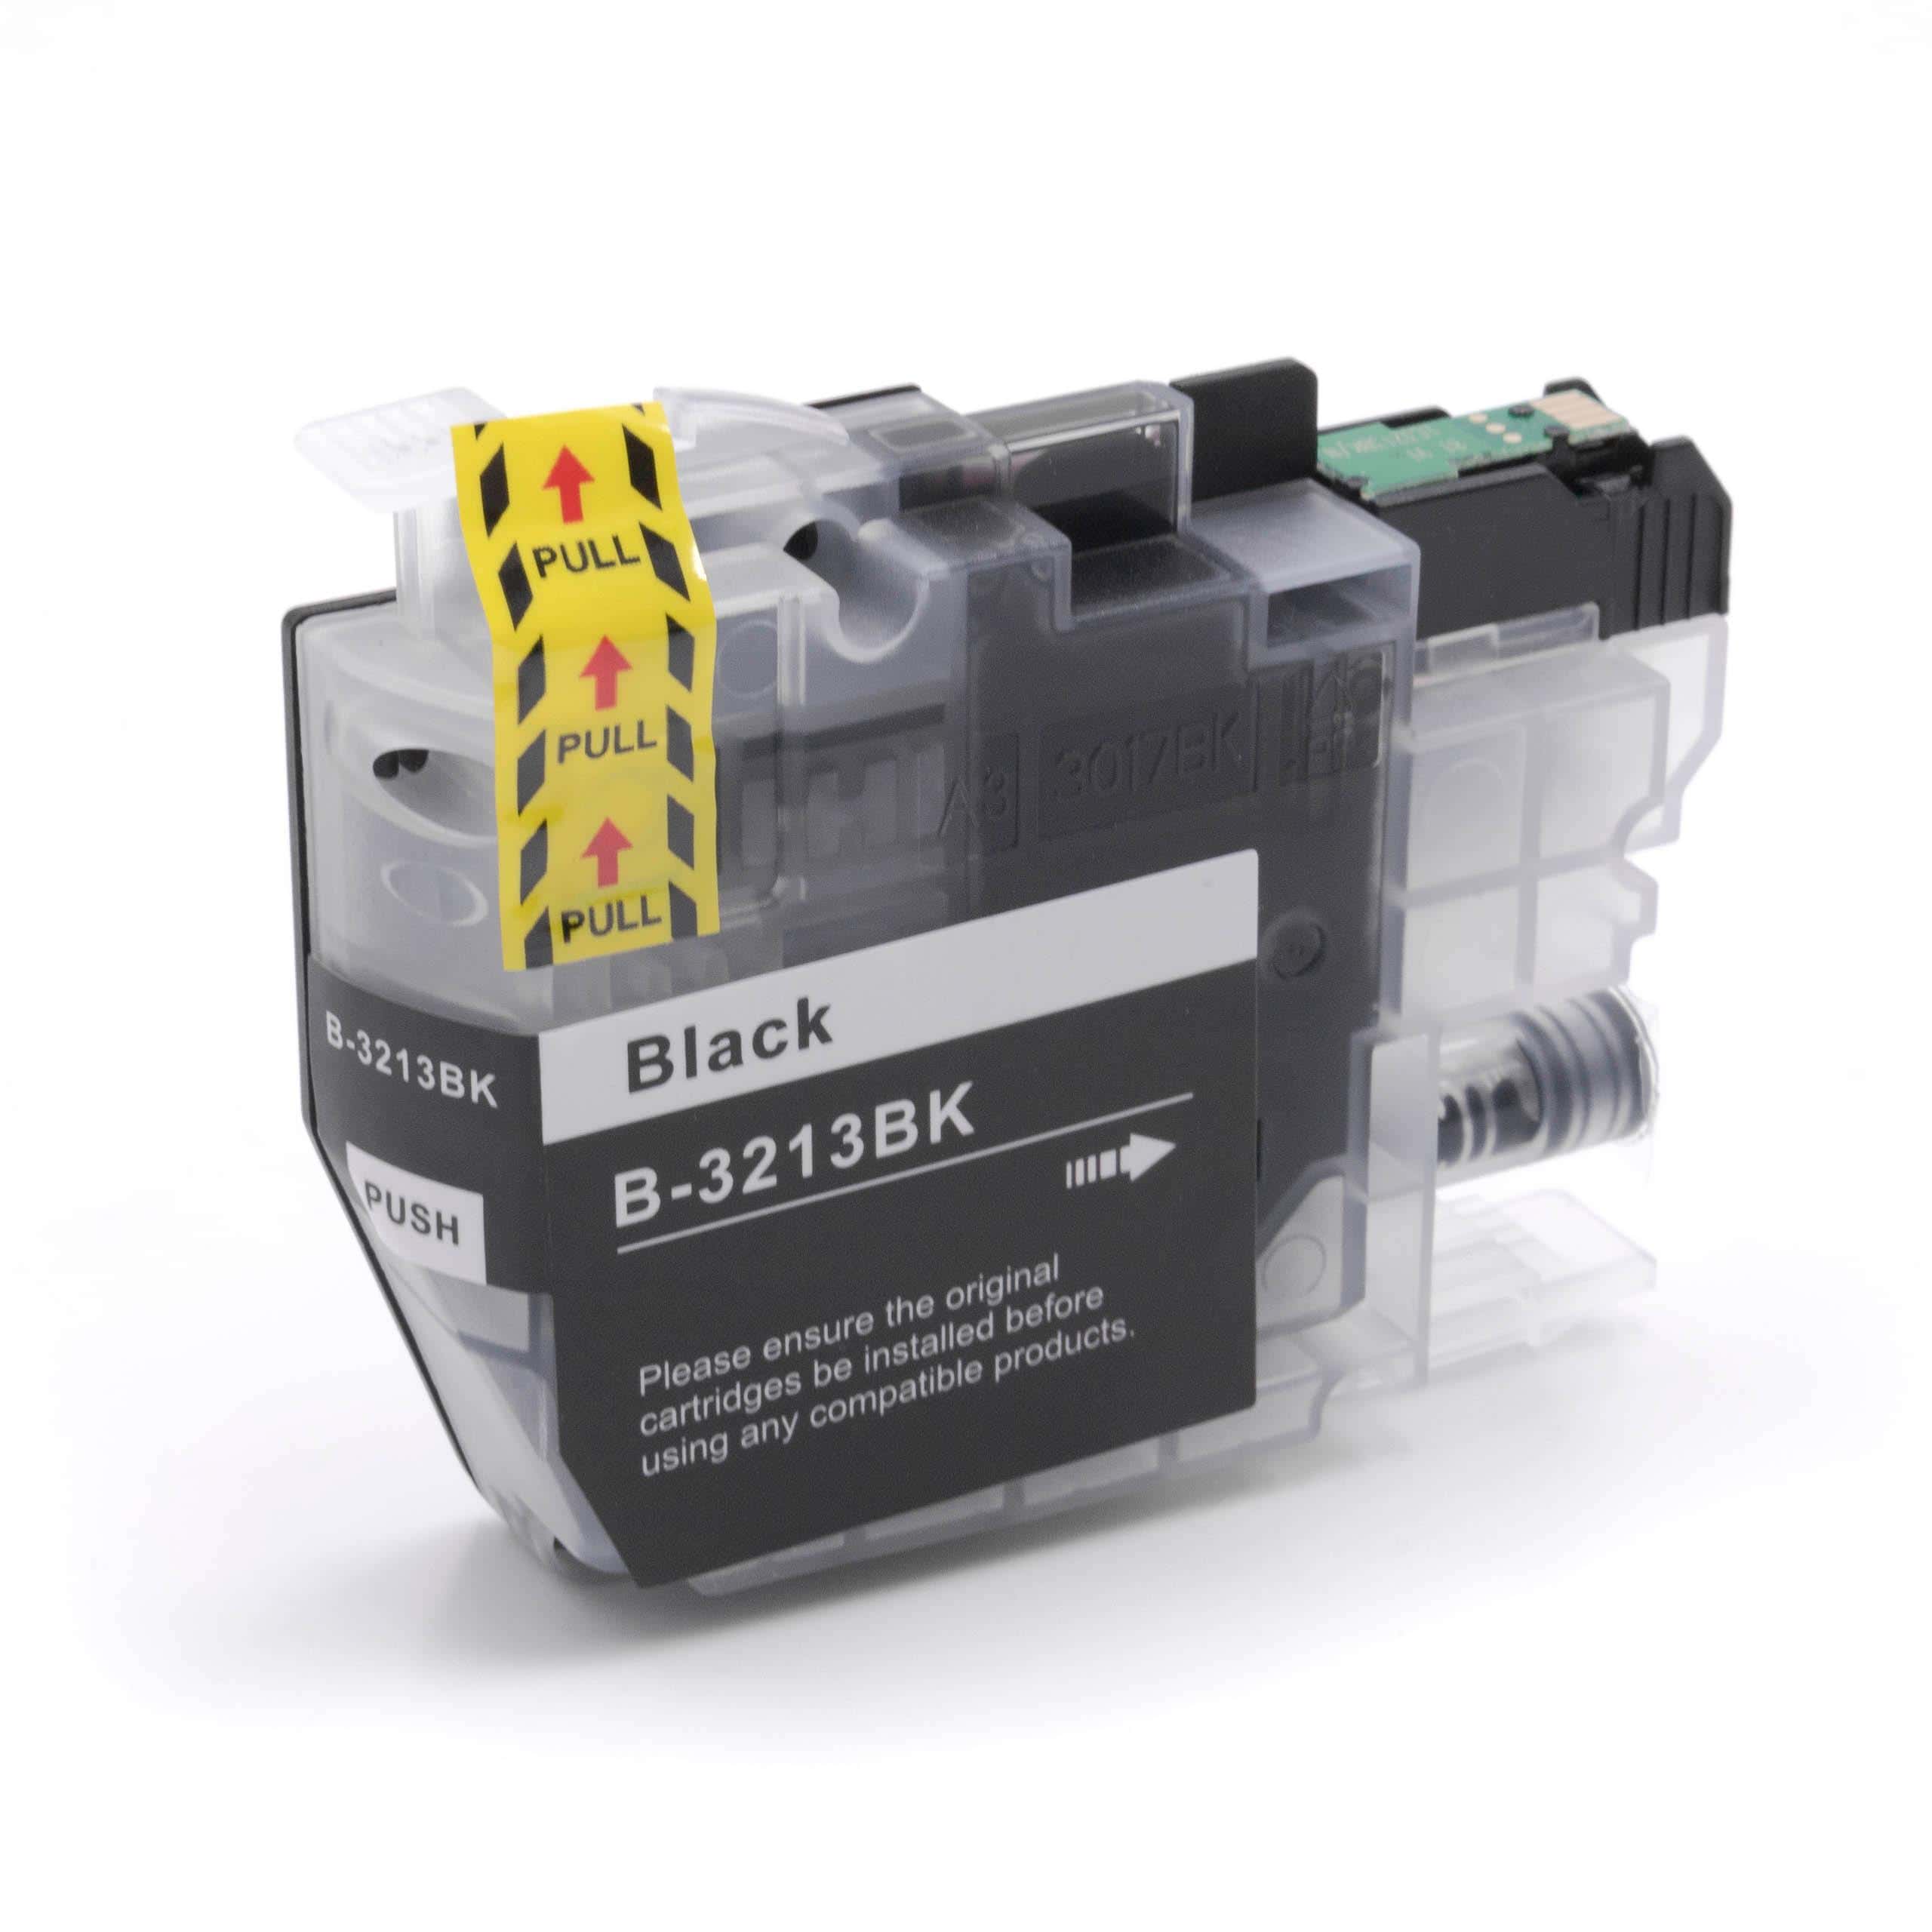 Ink Cartridge as Exchange for Brother LC3213BK, LC-3213BK for Brother Printer - Black 11 ml + Chip